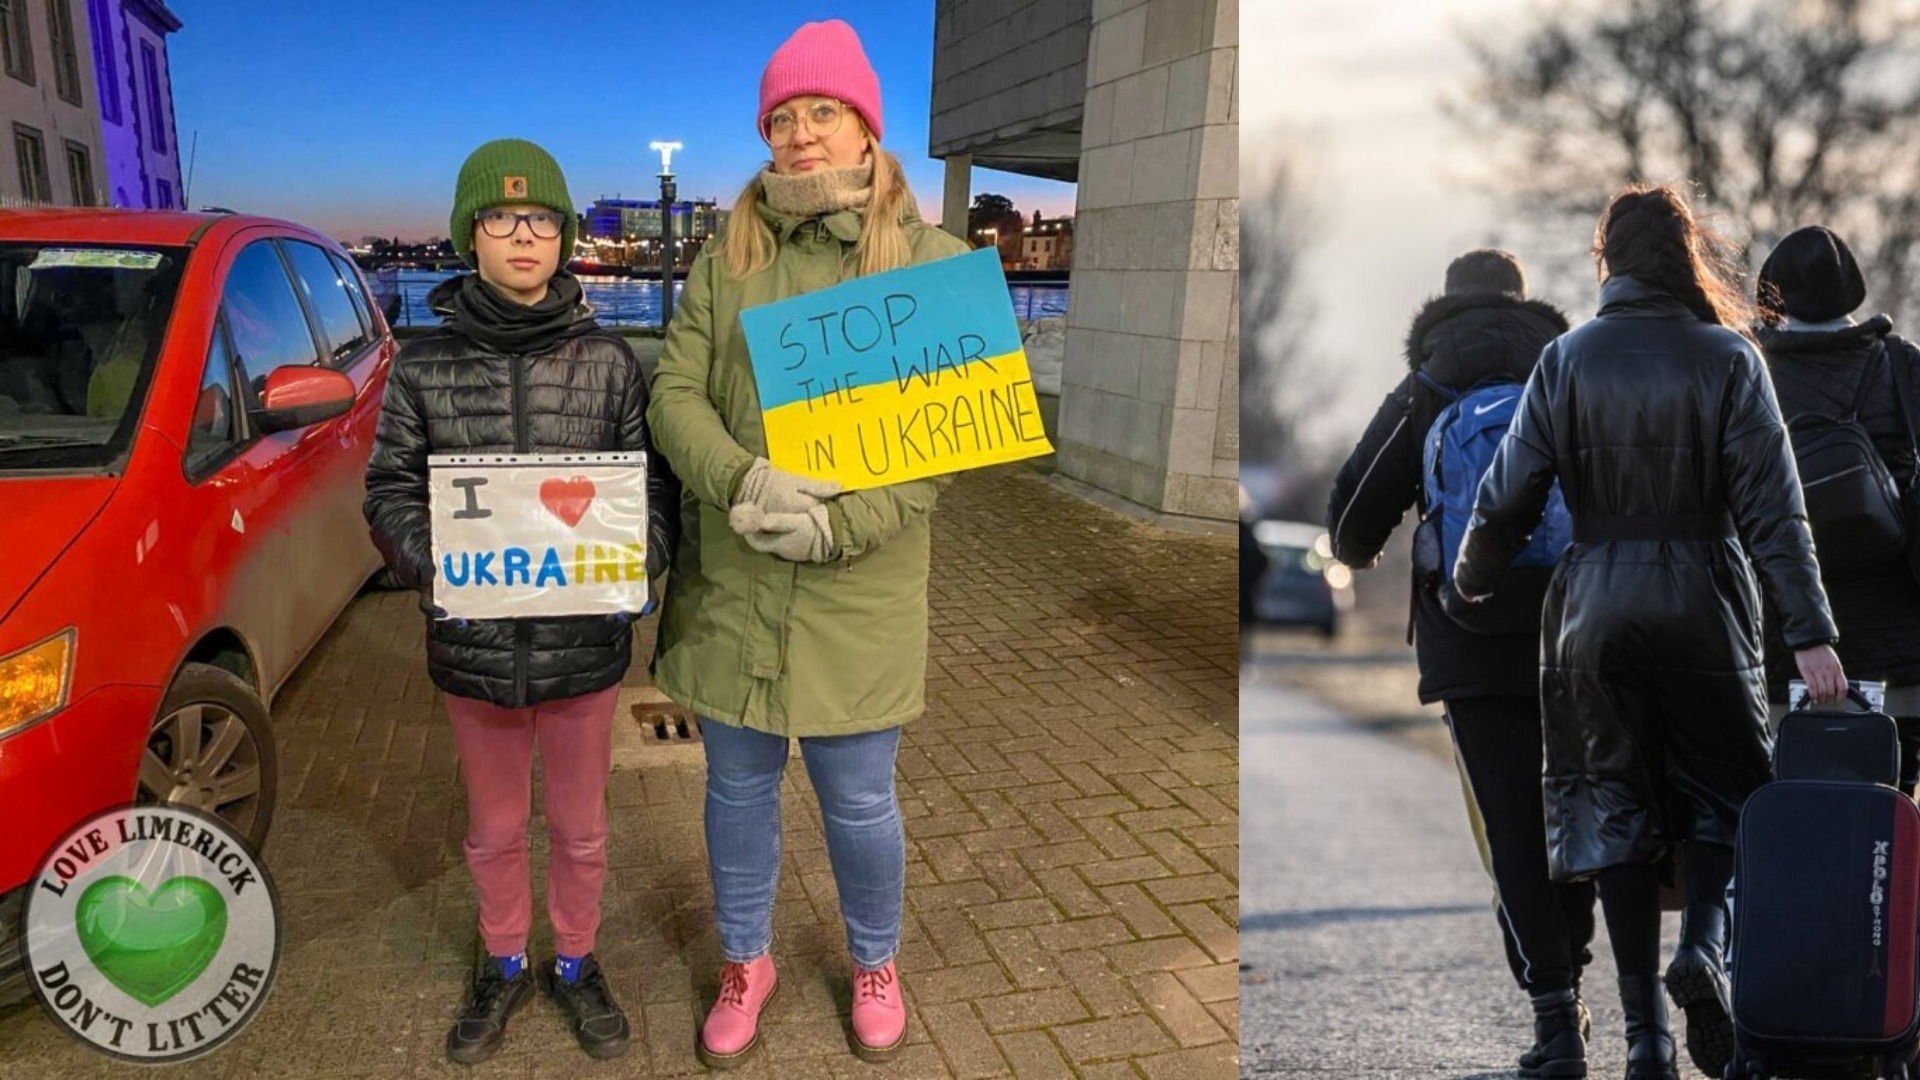 Ukraine Response - It is estimated that approximately over 5,500 refugees have arrived in Ireland, while government figures suggest that number could rise to 100,000.